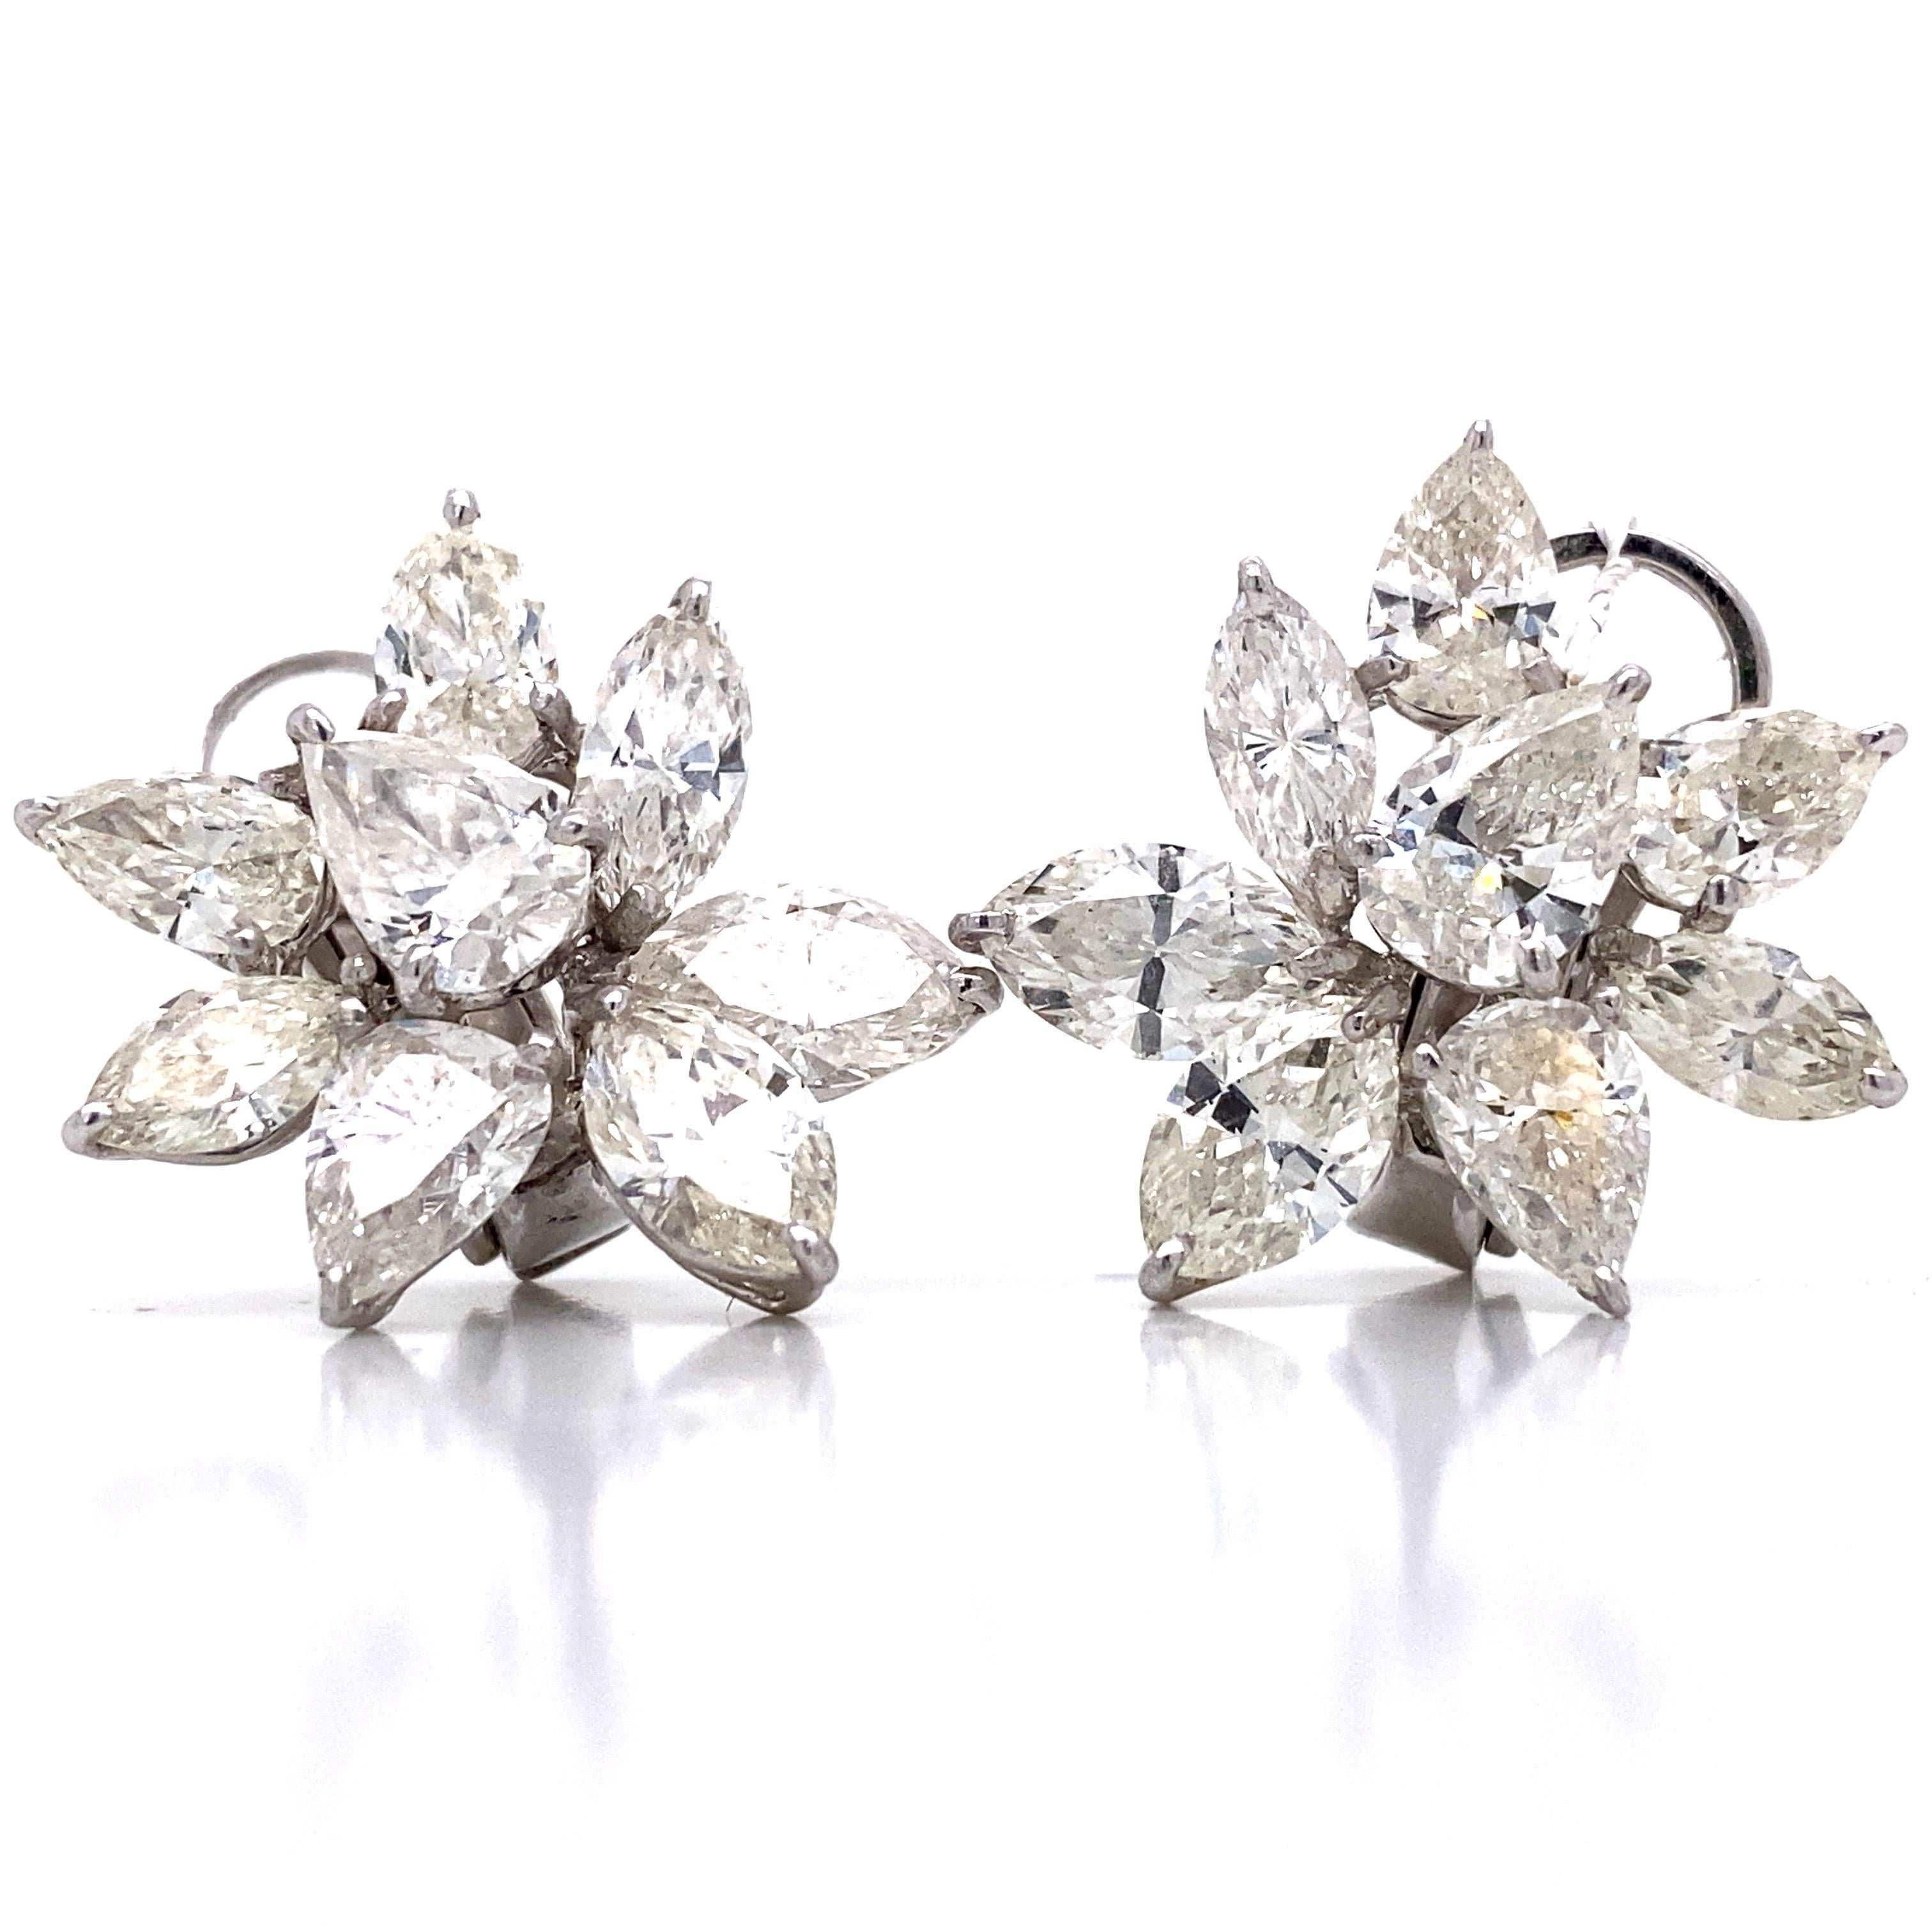 From the Vault at Emilio Jewelry New York, and hand made in our atelier,
A Pair of gorgeous striking classy cluster earrings. Each and every diamond is Gia certified. The sizes of the diamonds are listed below with the color and clarity. Please